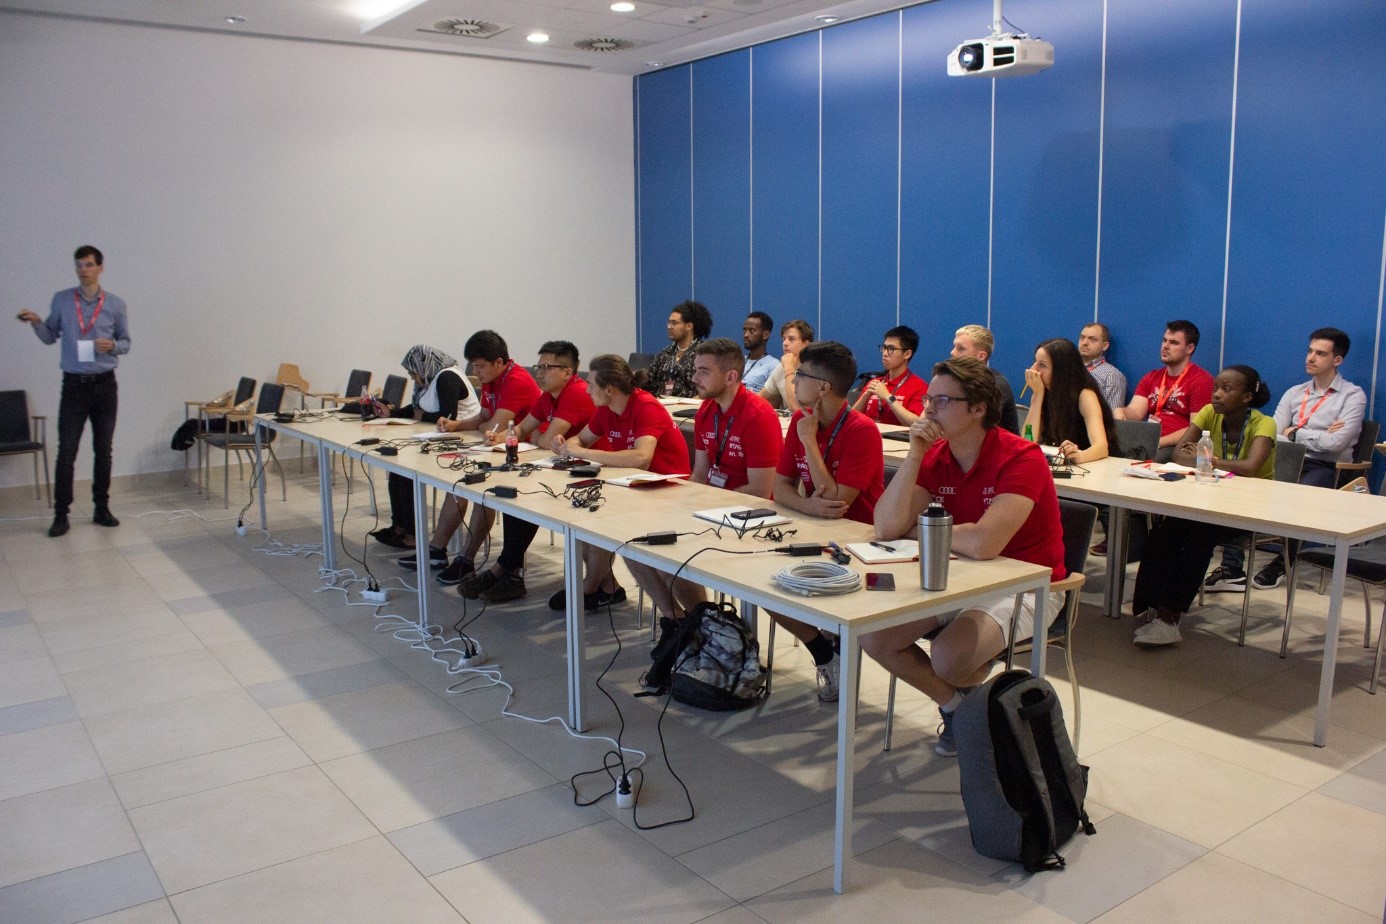 During the first week, divided into two sections, the students participate in professional training to prepare them for solving the project task. 